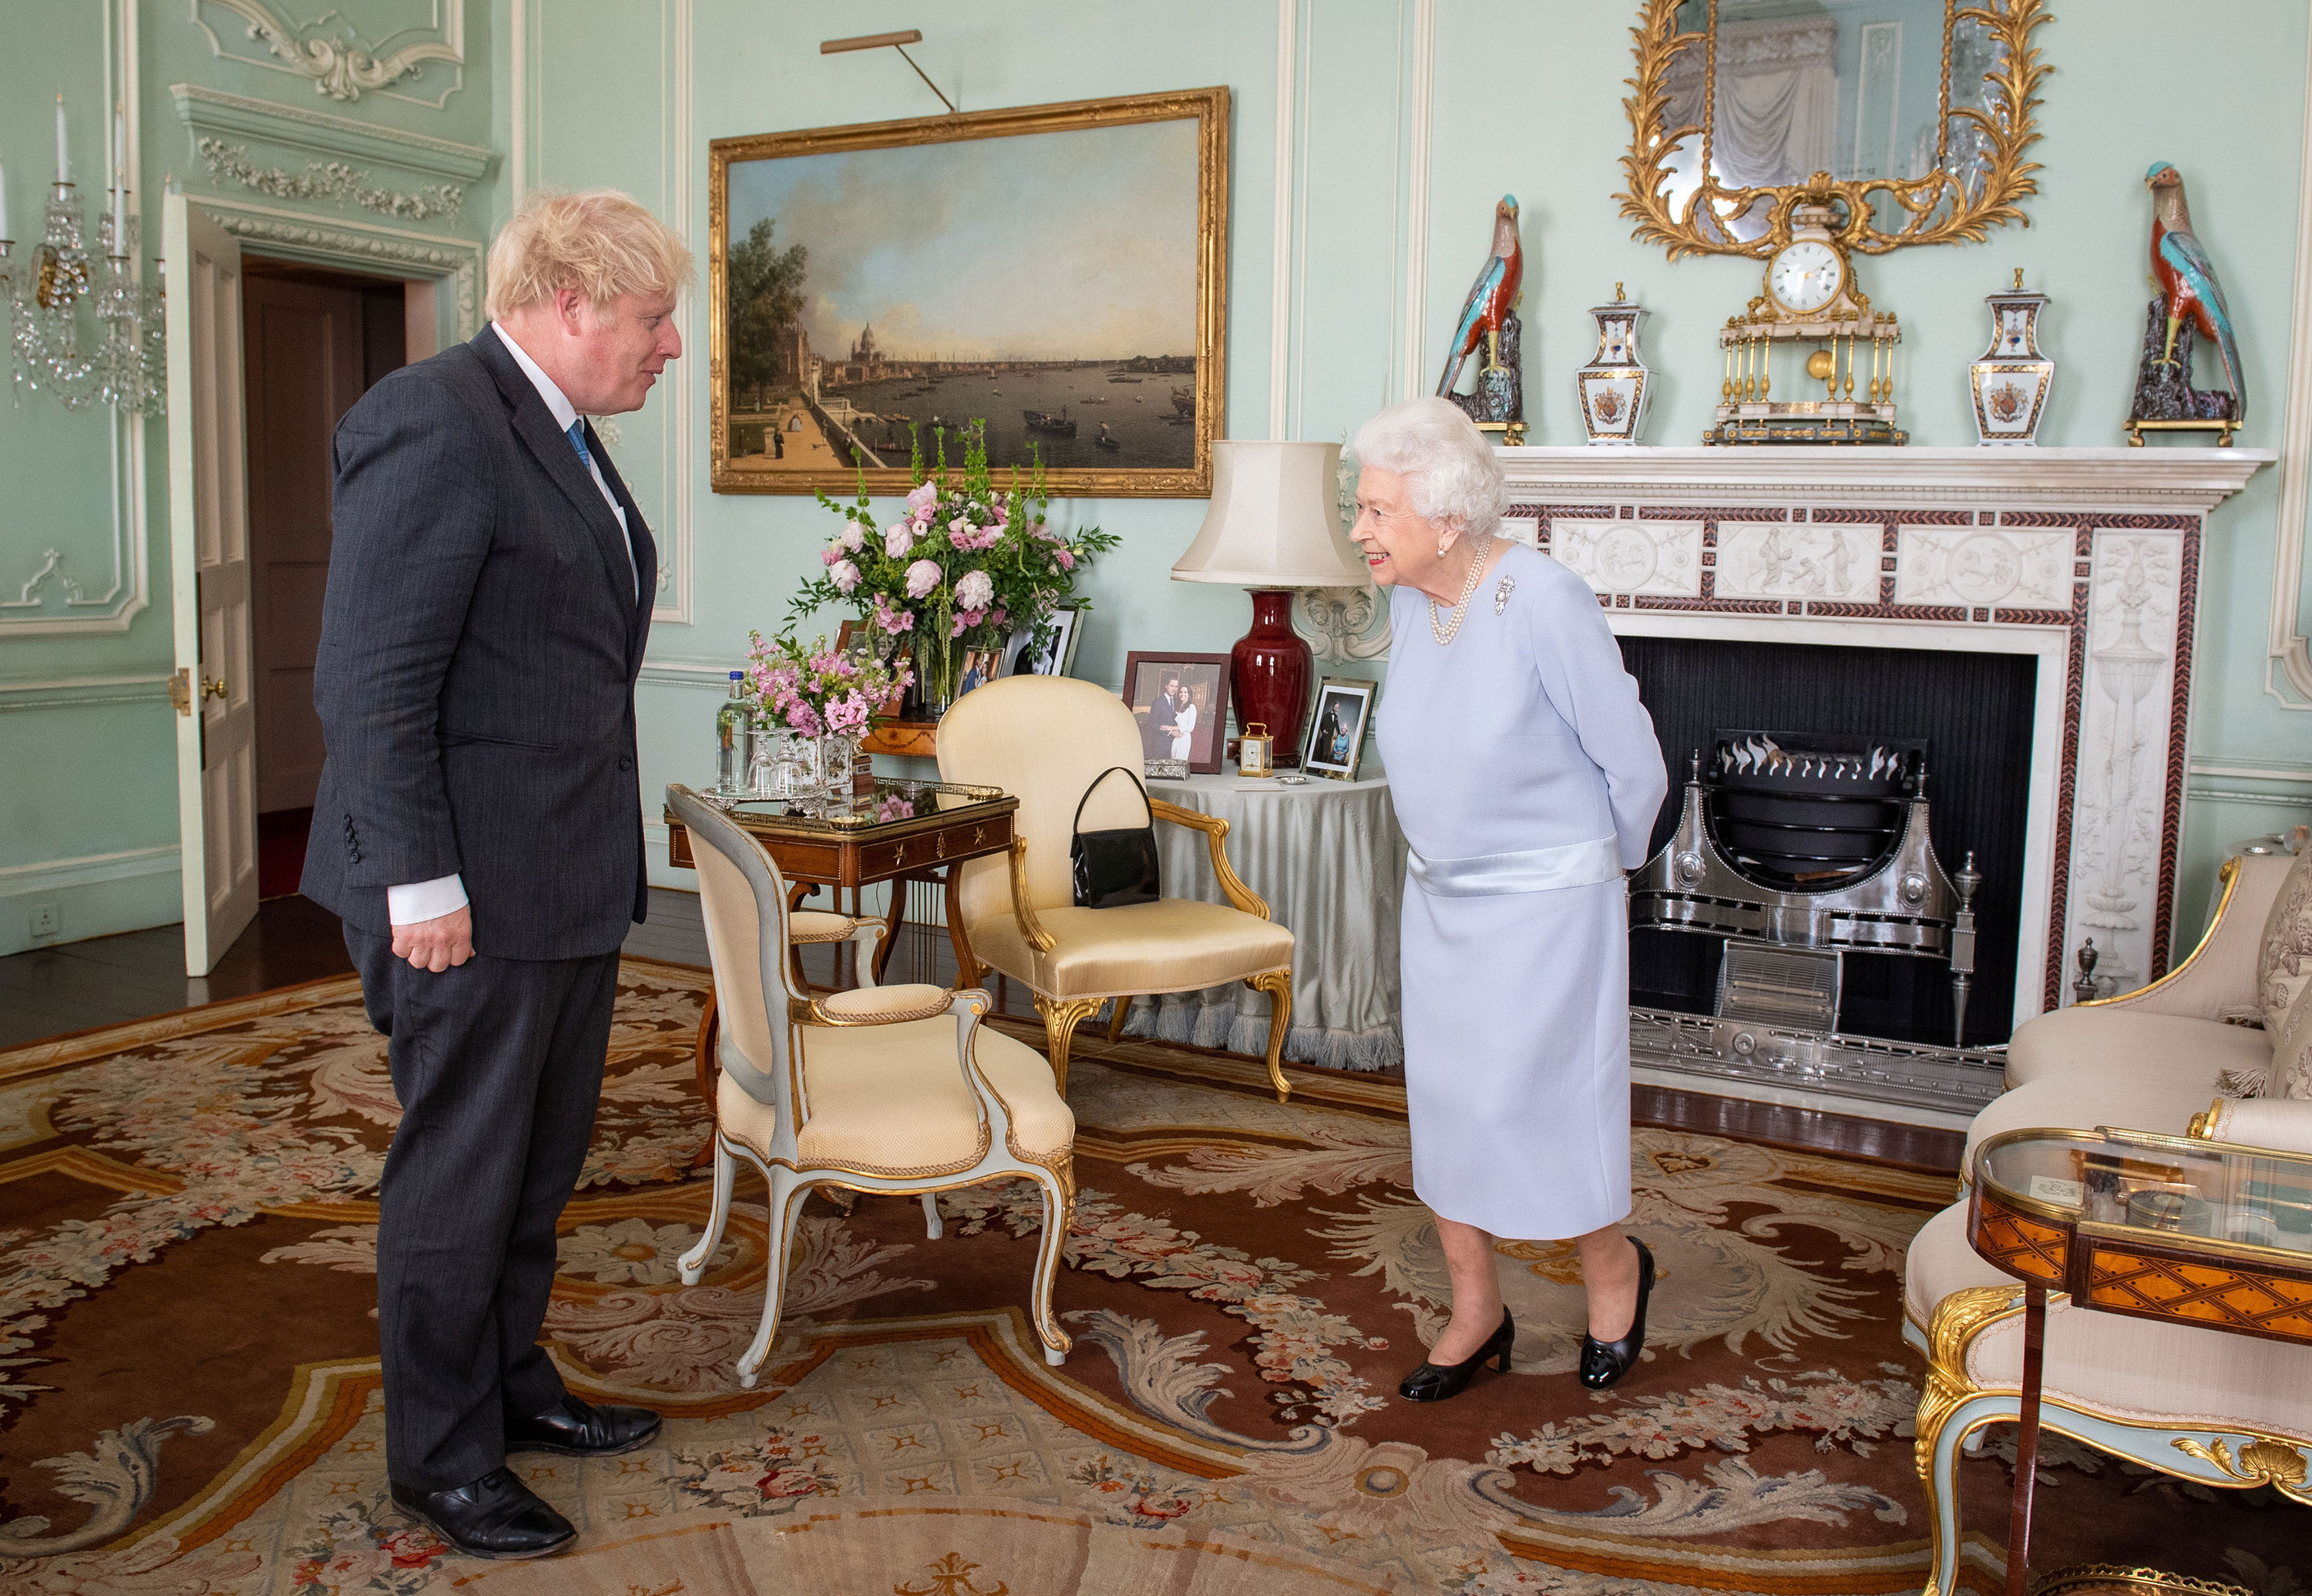 The Queen greets then-Prime Minister Boris Johnson at Buckingham Palace in June 2021.